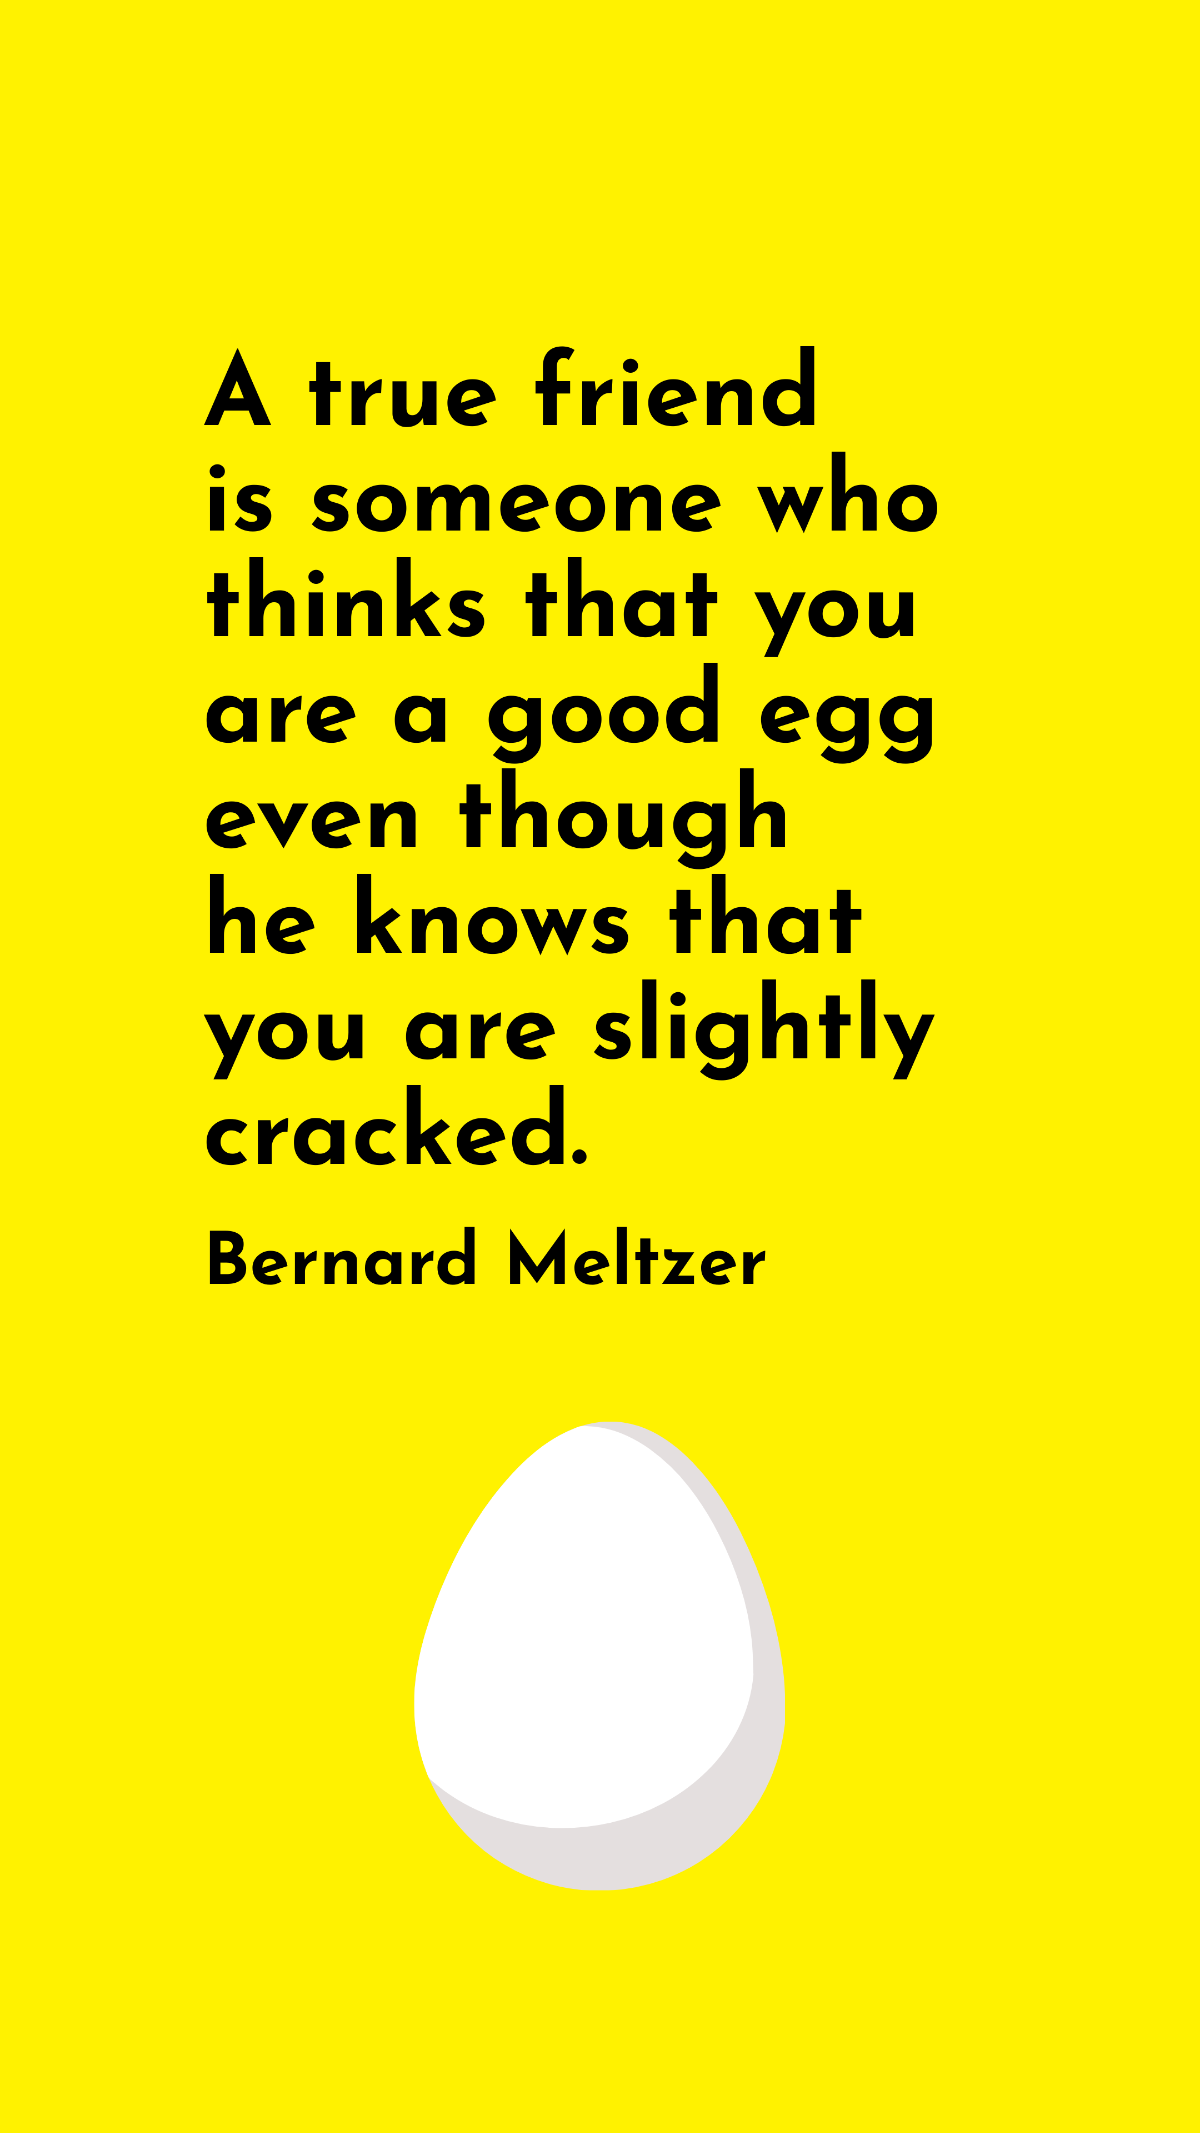 Bernard Meltzer - A true friend is someone who thinks that you are a good egg even though he knows that you are slightly cracked. Template